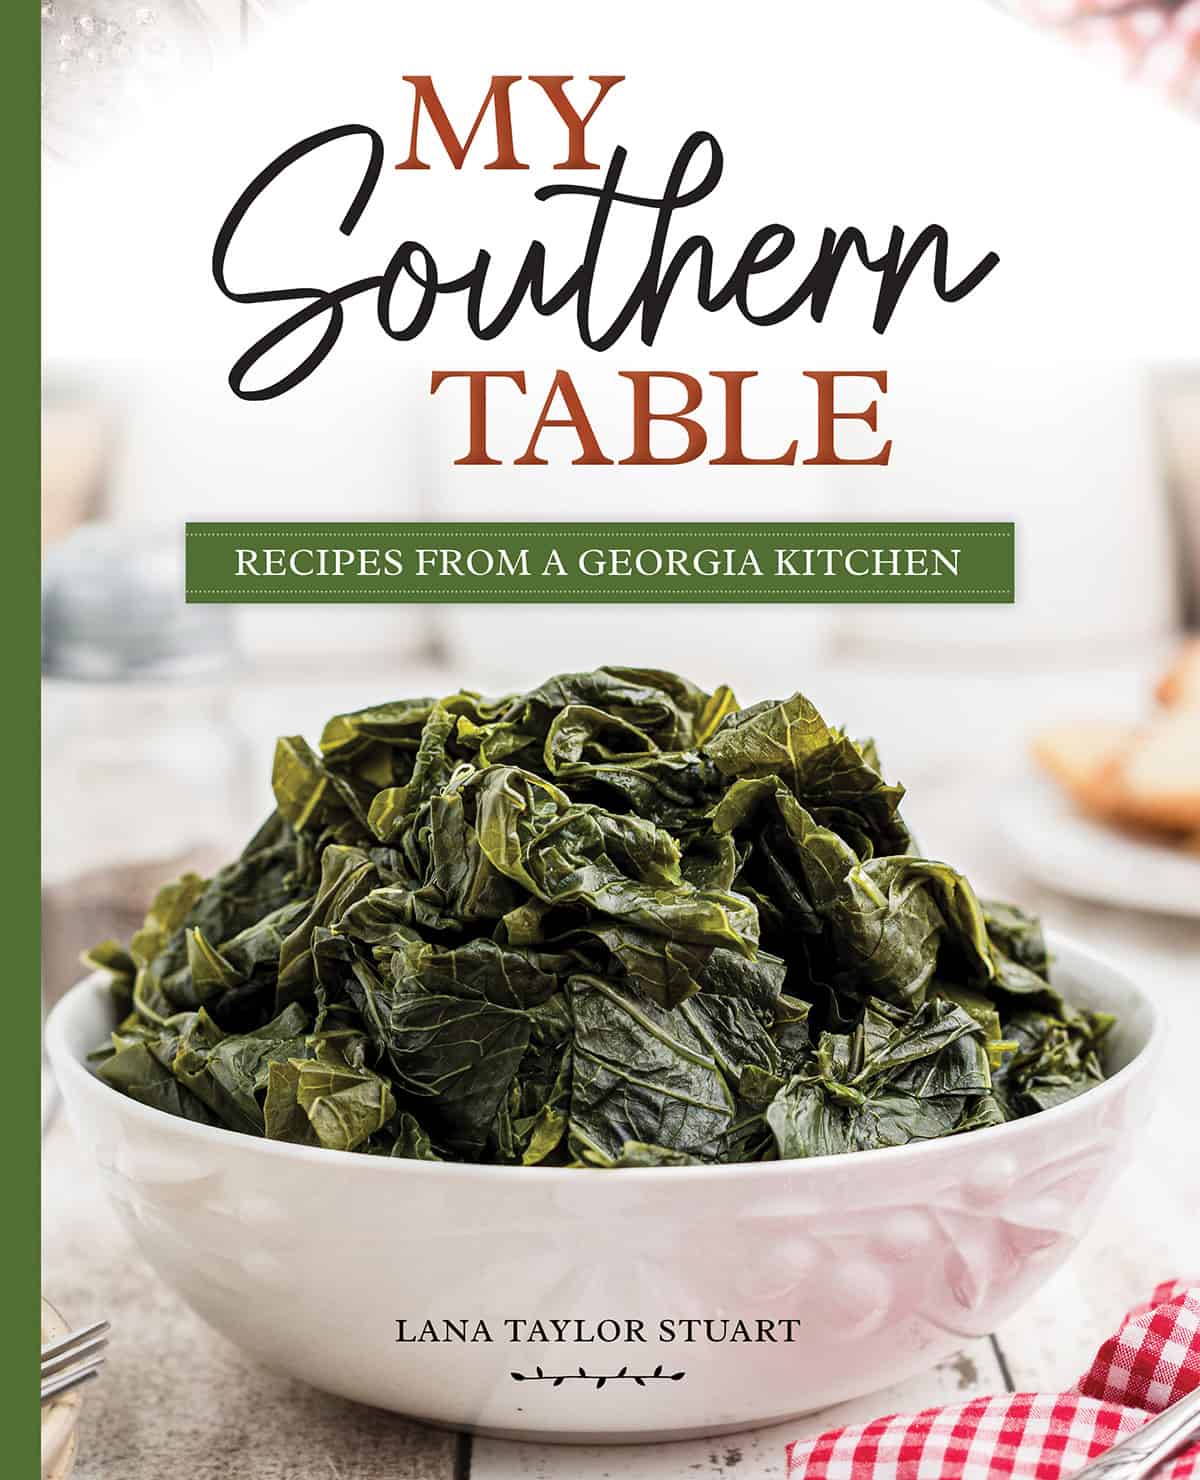 Front cover of "My Southern Table."